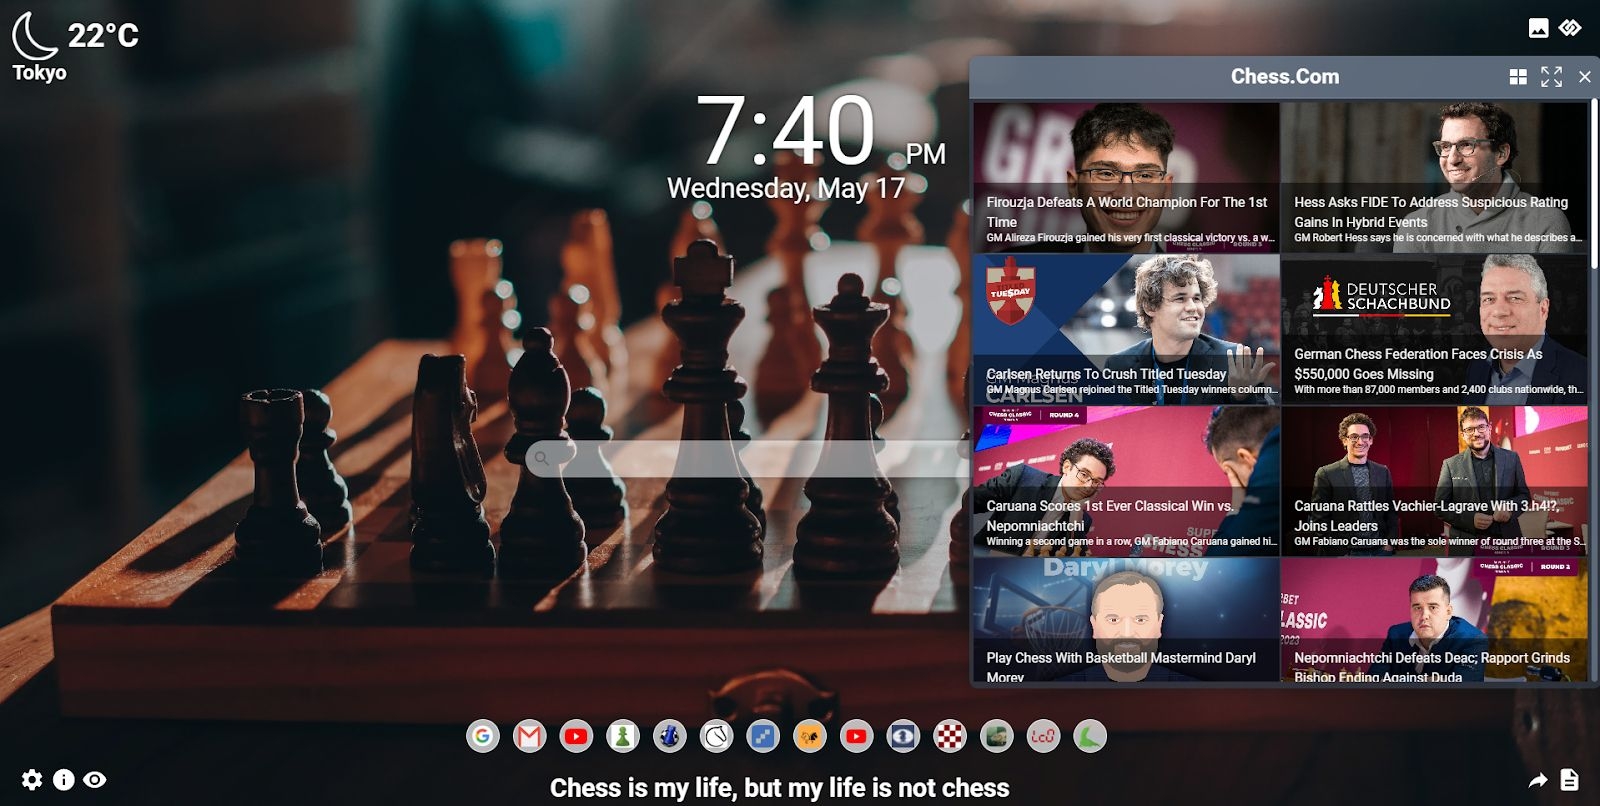 Mastering Chess News Tracking with the MeaVana Chrome Extension